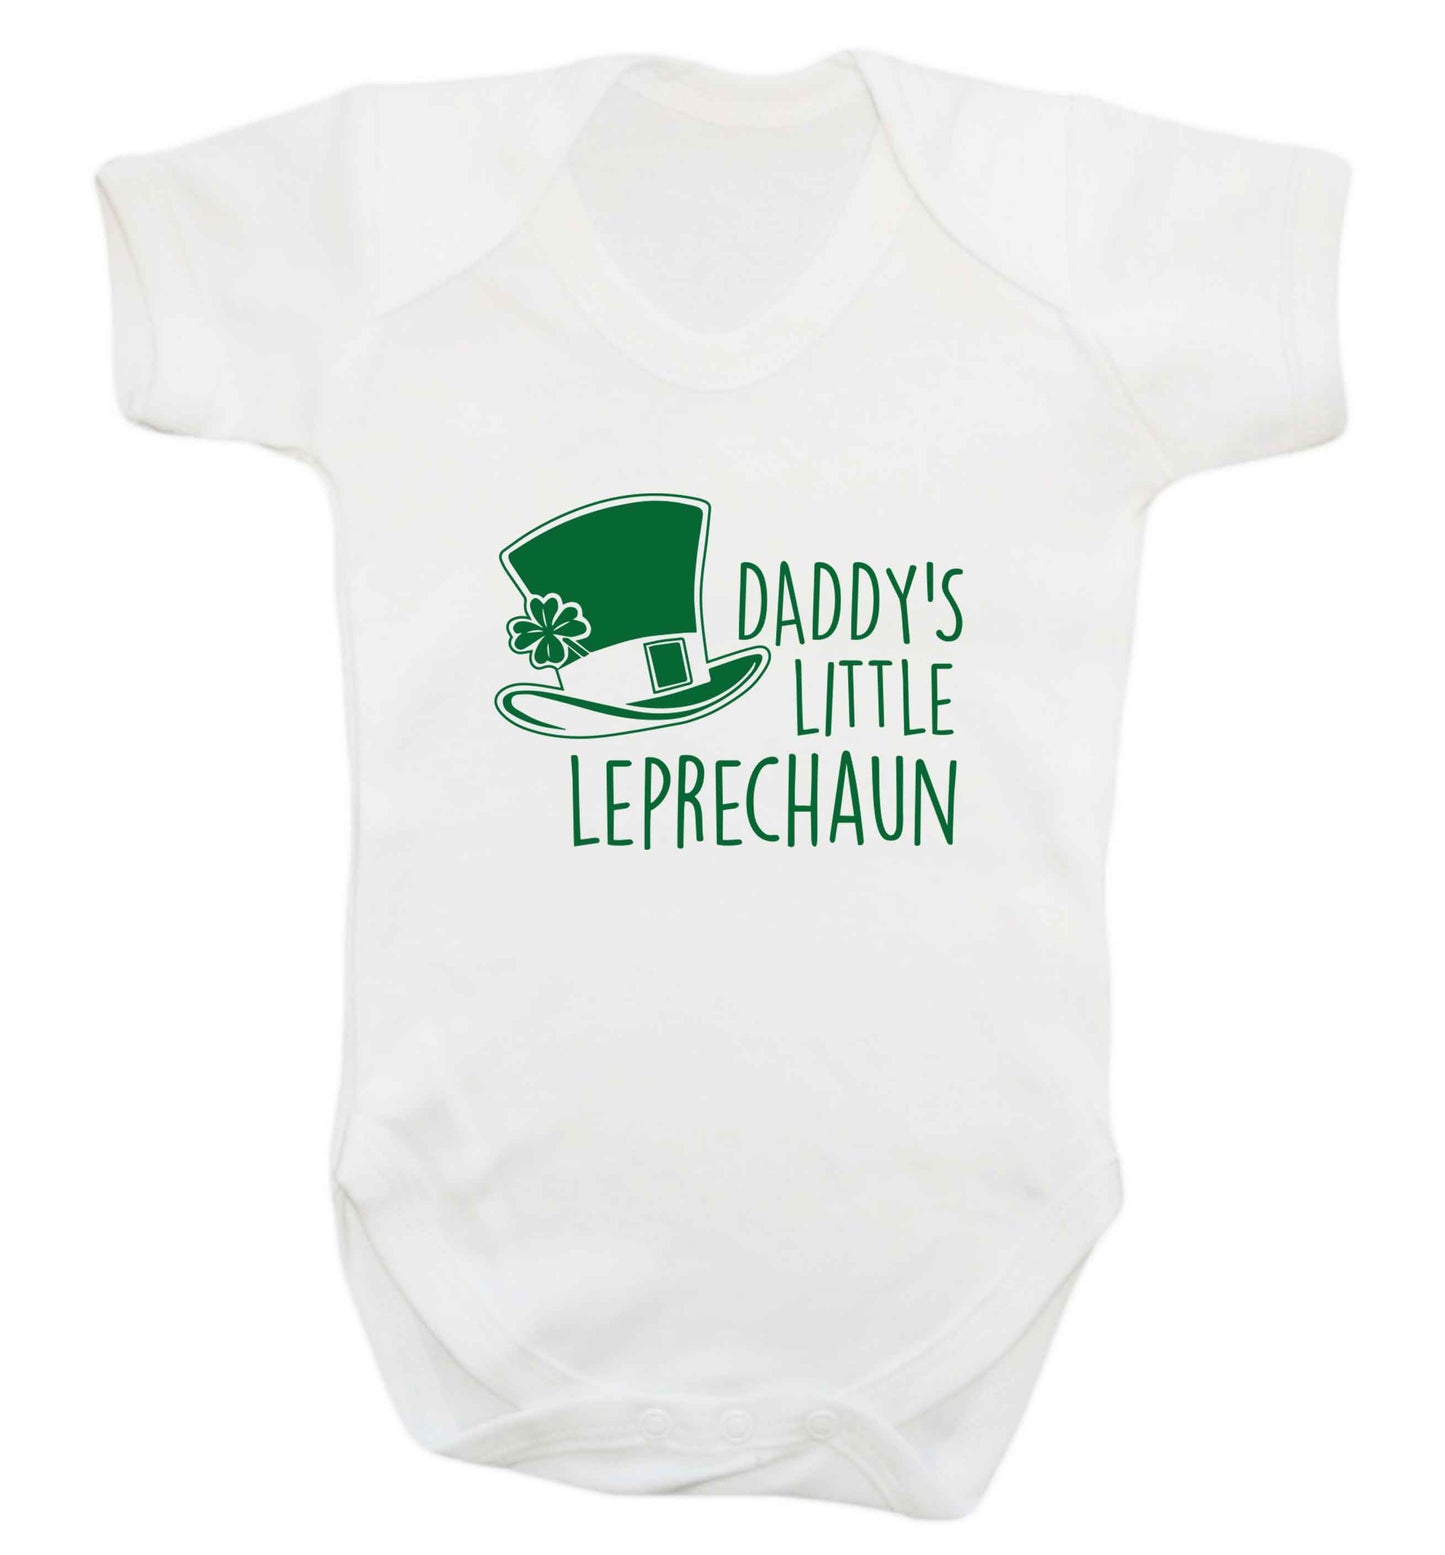 Daddy's lucky charm baby vest white 18-24 months